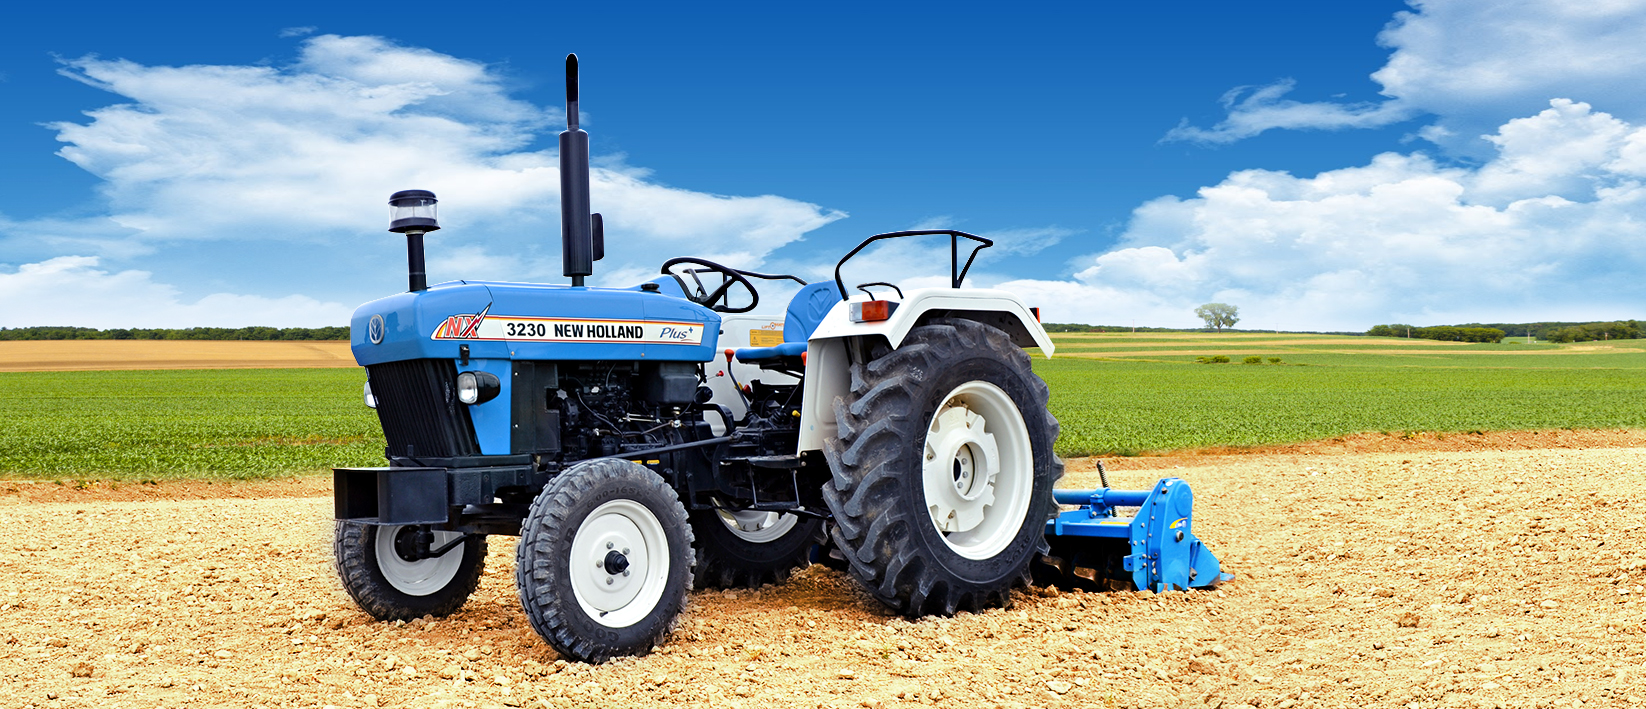 New Holland Tractor Backgrounds, Compatible - PC, Mobile, Gadgets| 1646x709 px